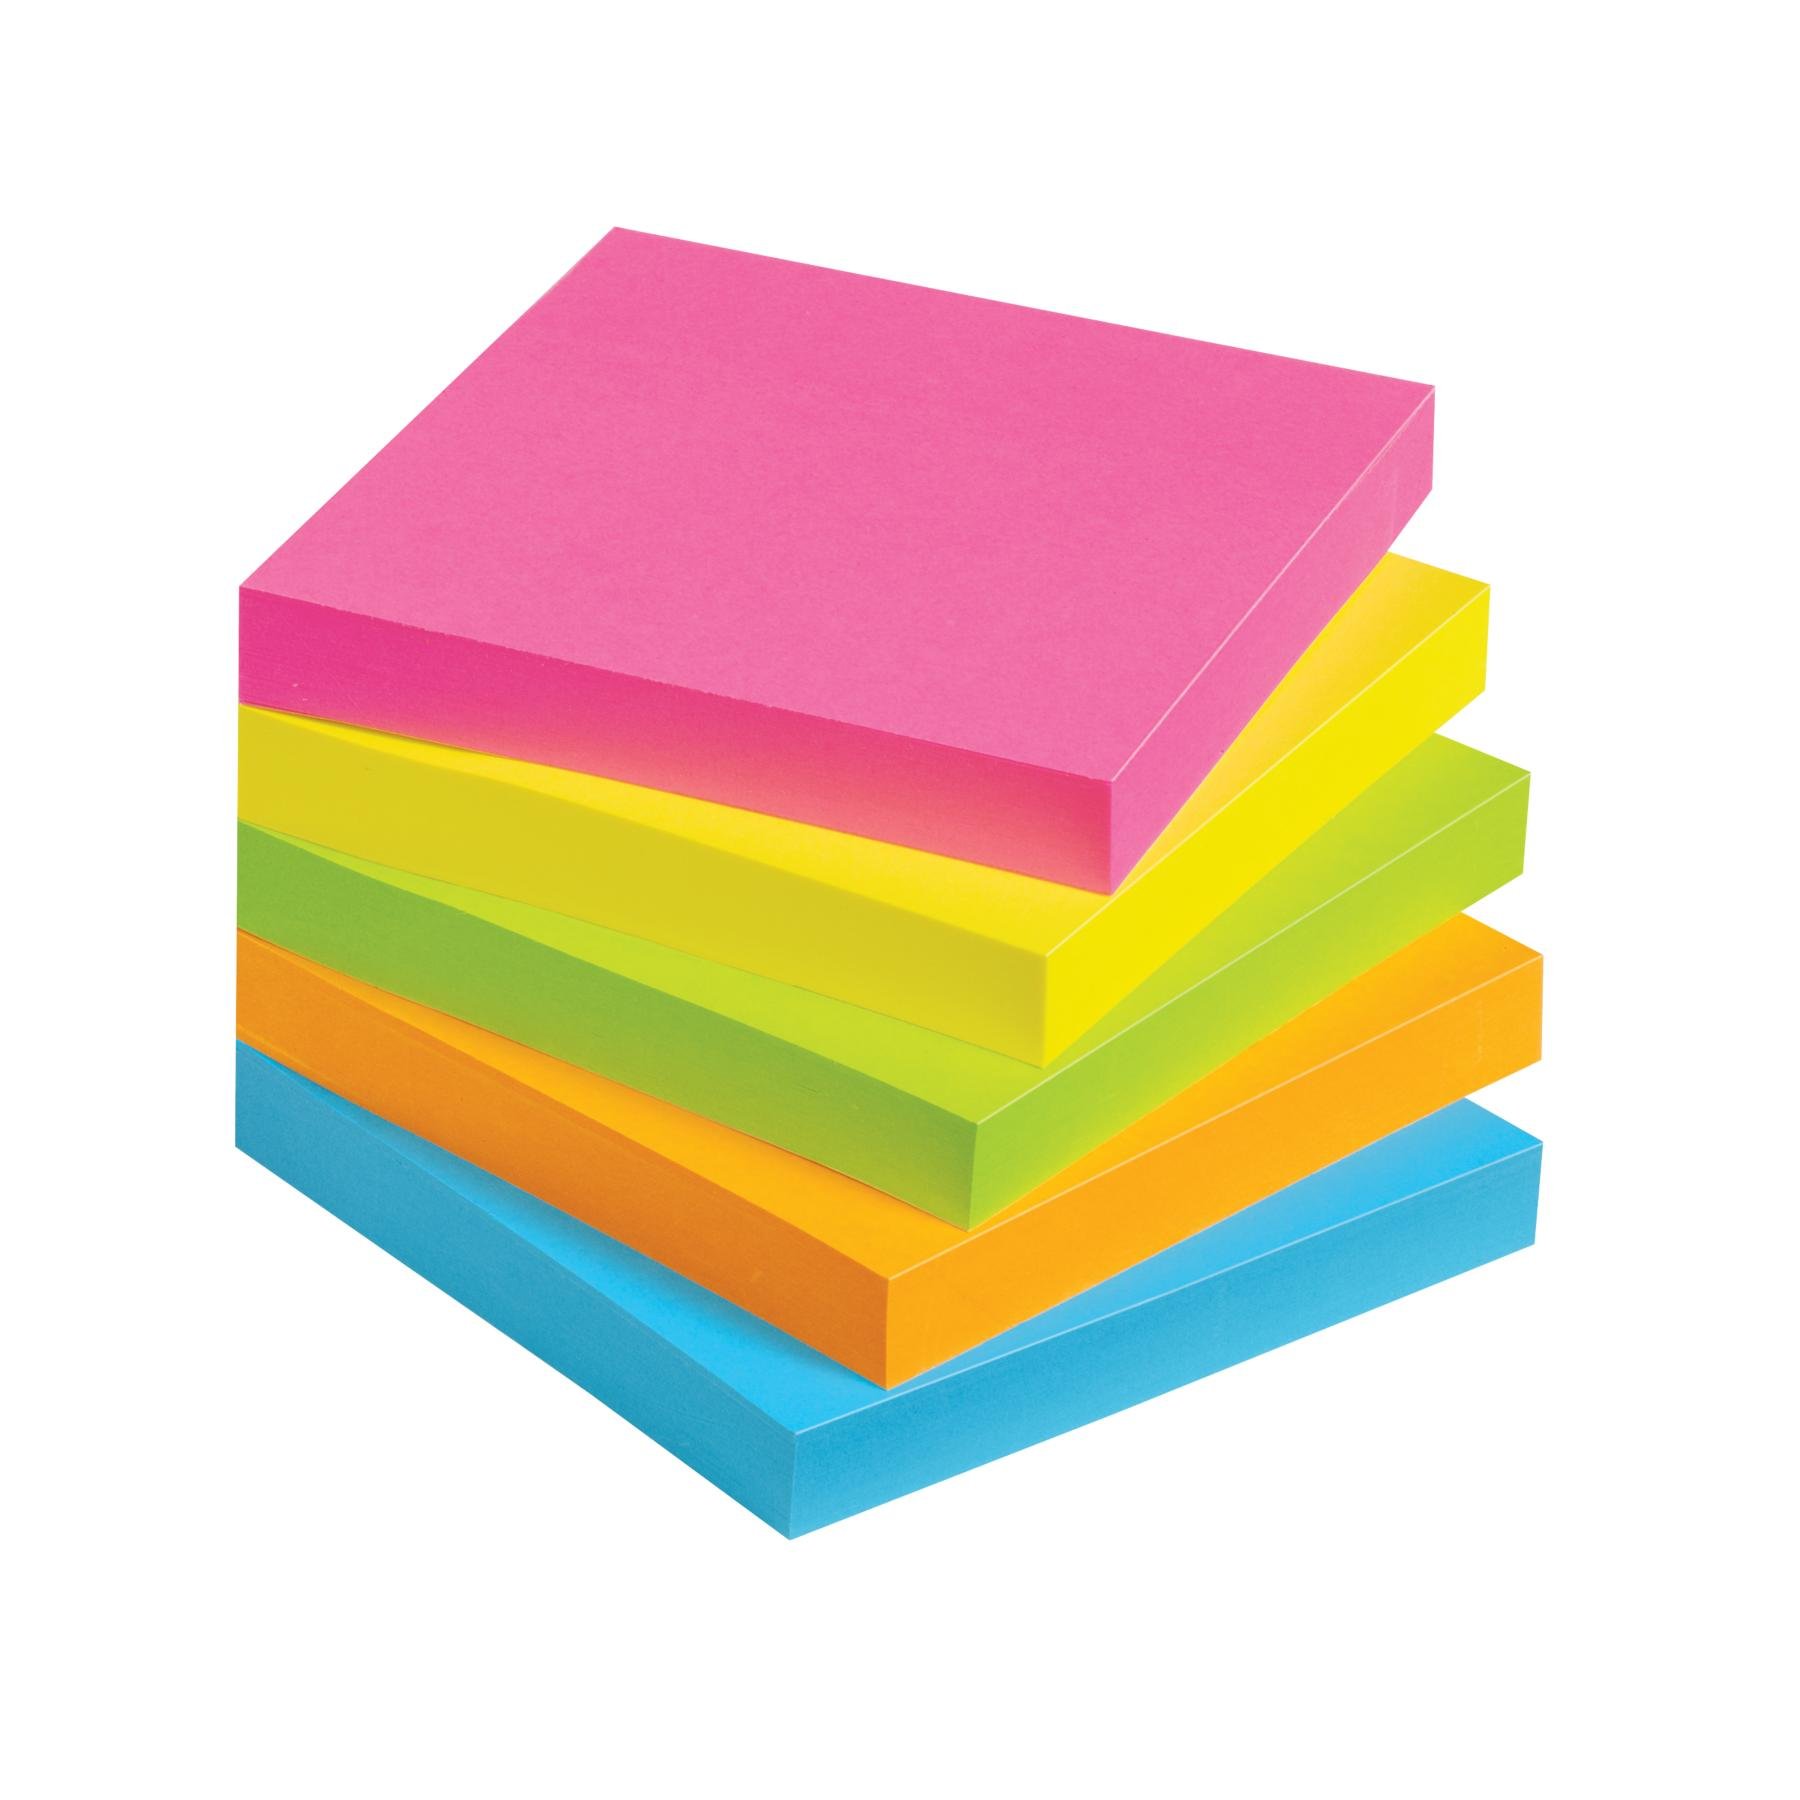 Sticky Note Picture - ClipArt Best